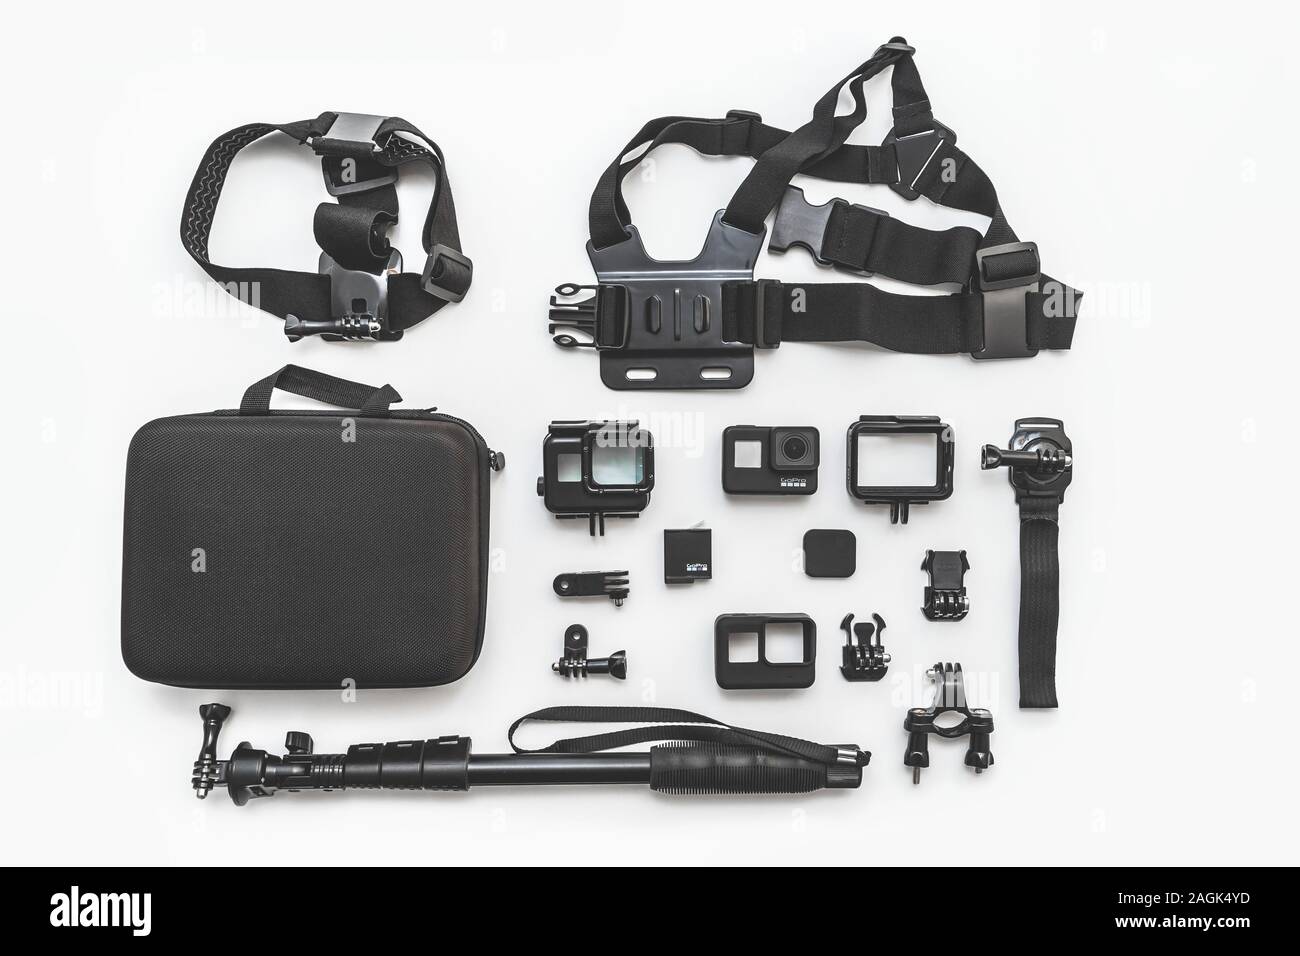 Minsk, Belarus - December 20, 2019: GoPro HERO 7 Black action camera with accessories on white background top view. Stock Photo